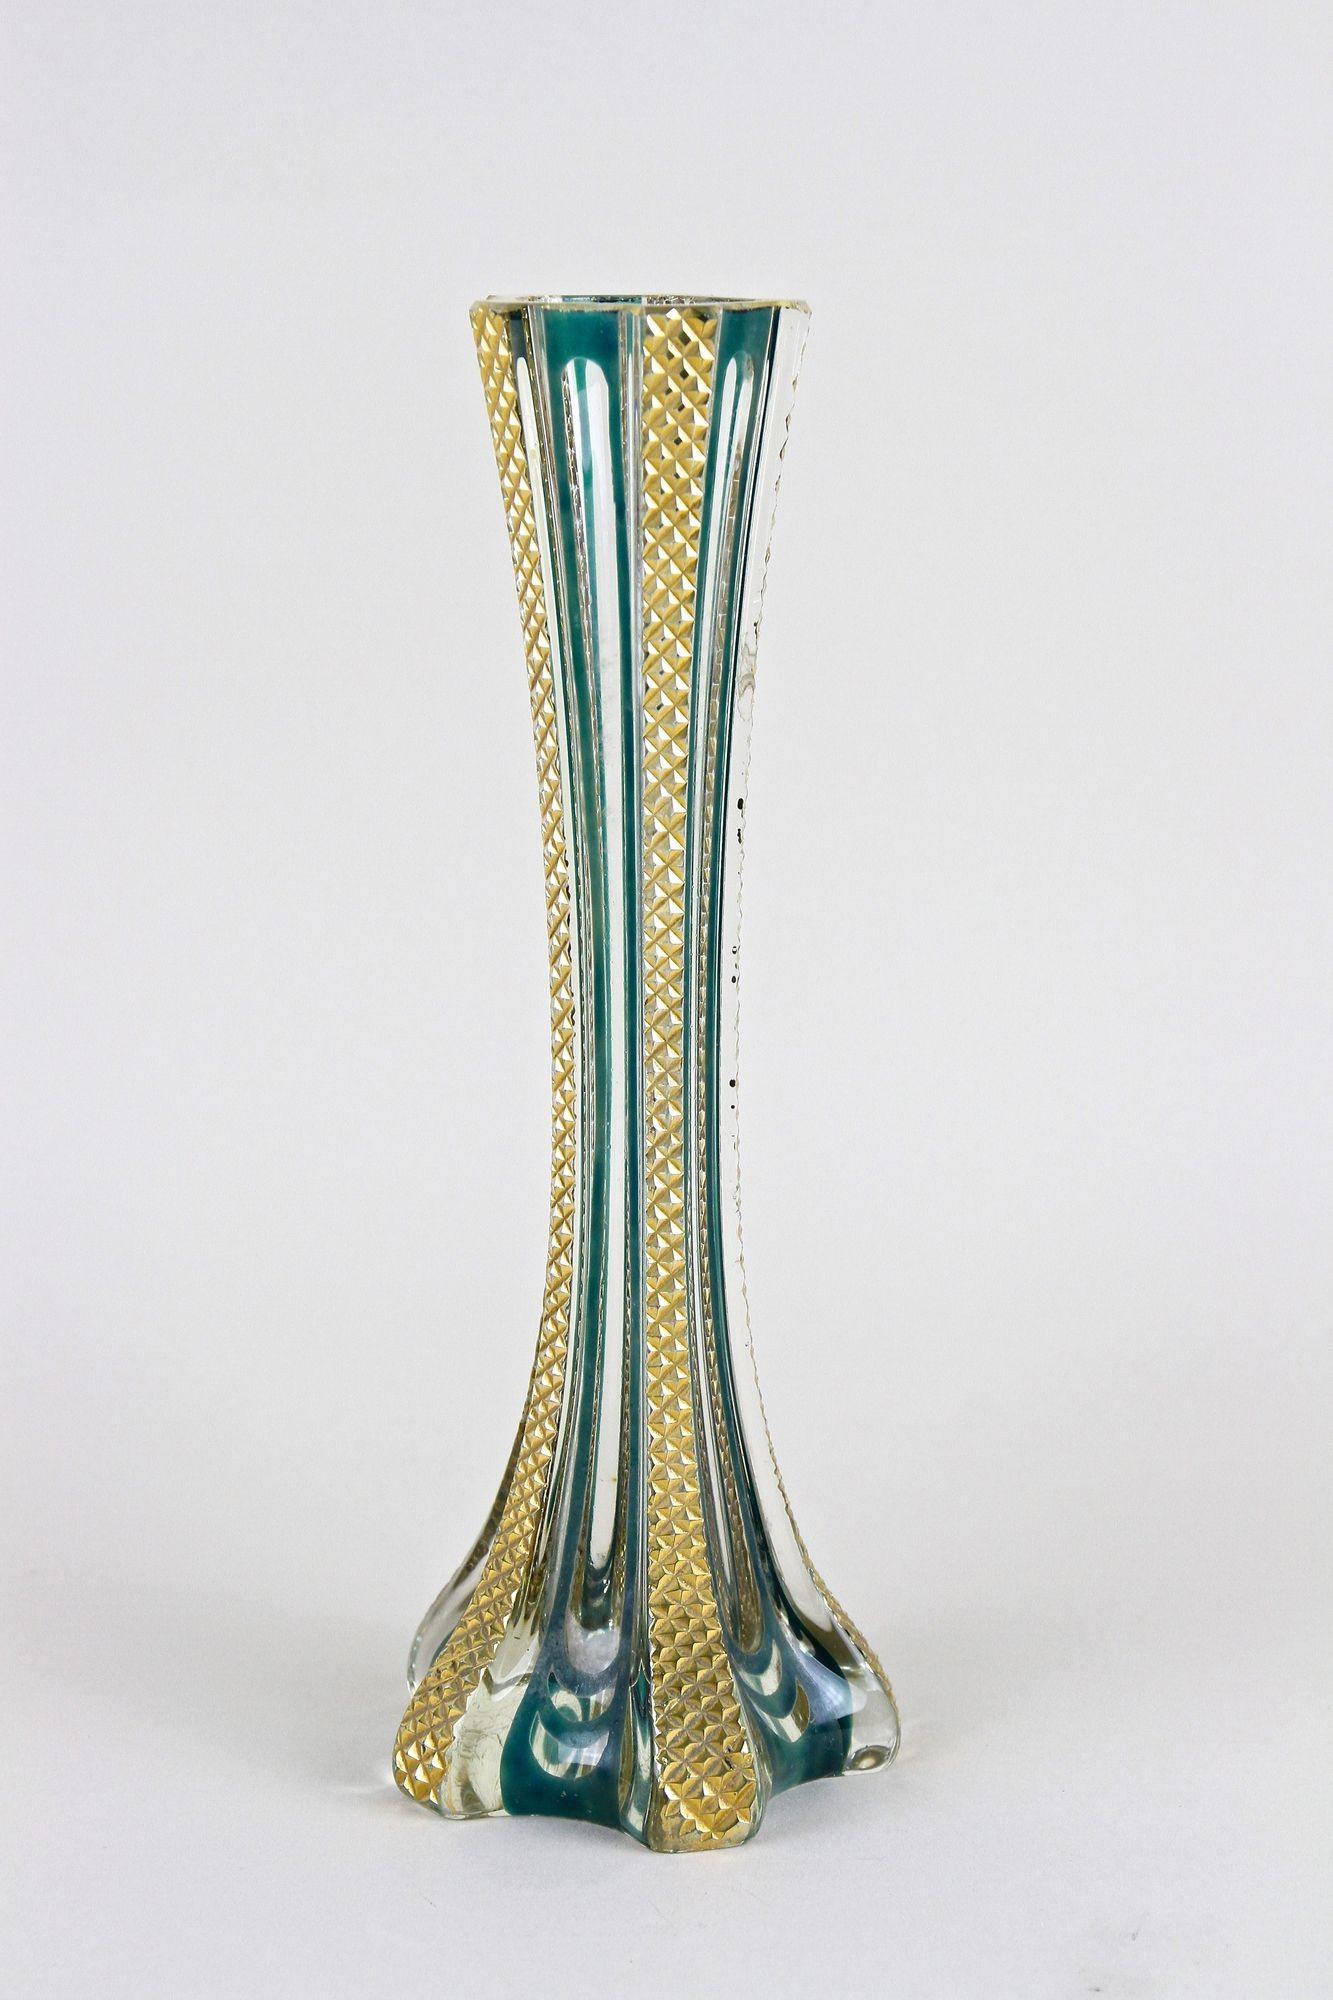 Murano Glass Vase With Gold Accents, Early 20th Century - Italy ca. 1930 For Sale 6